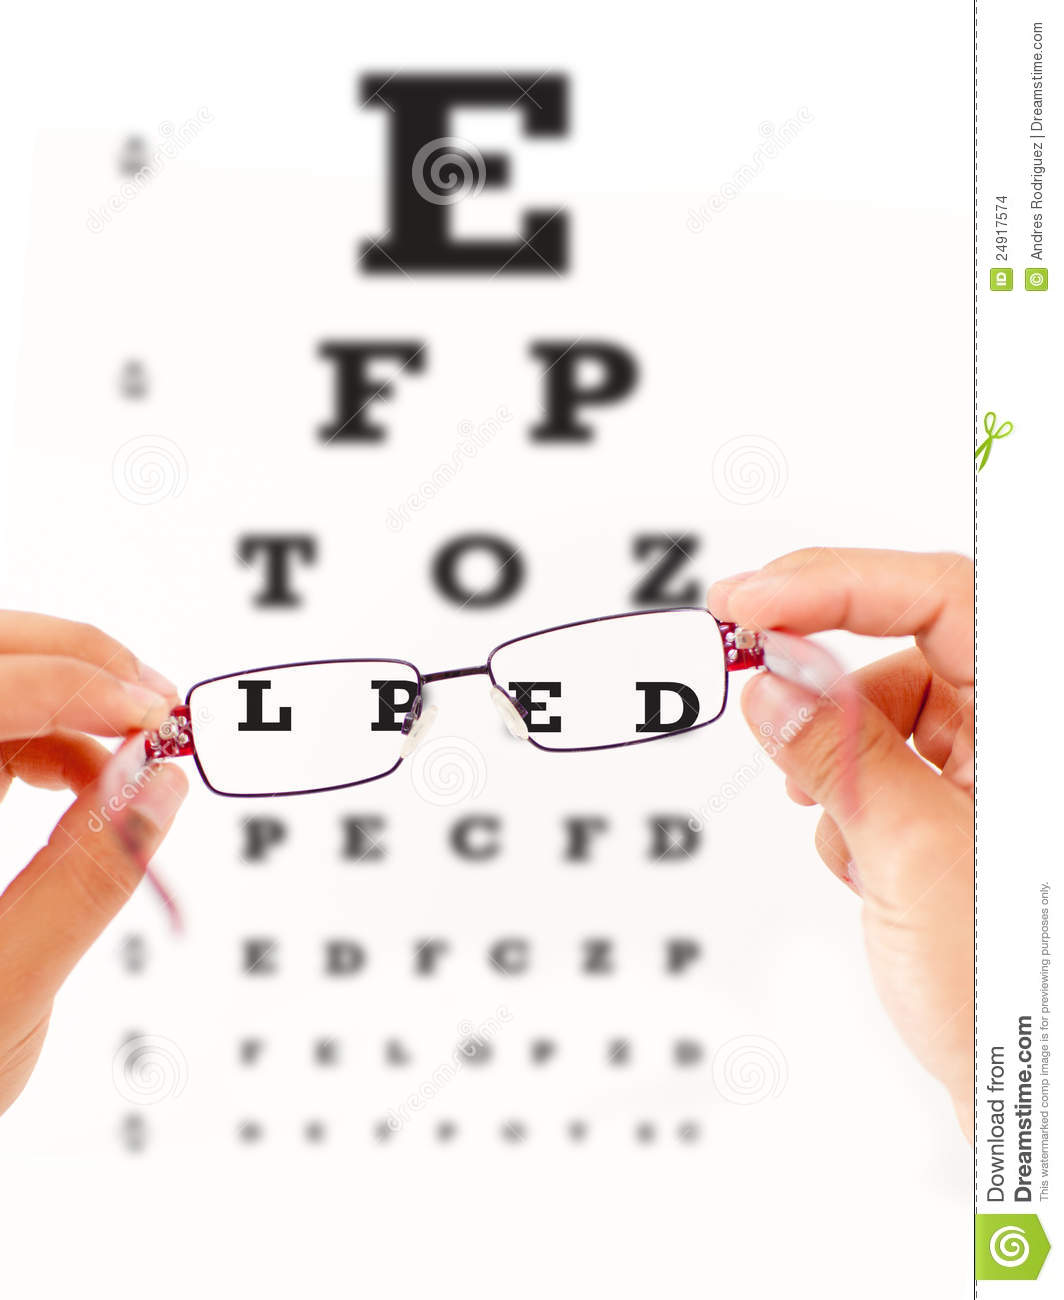 Eye Vision Test And Sight Improving With Glasses